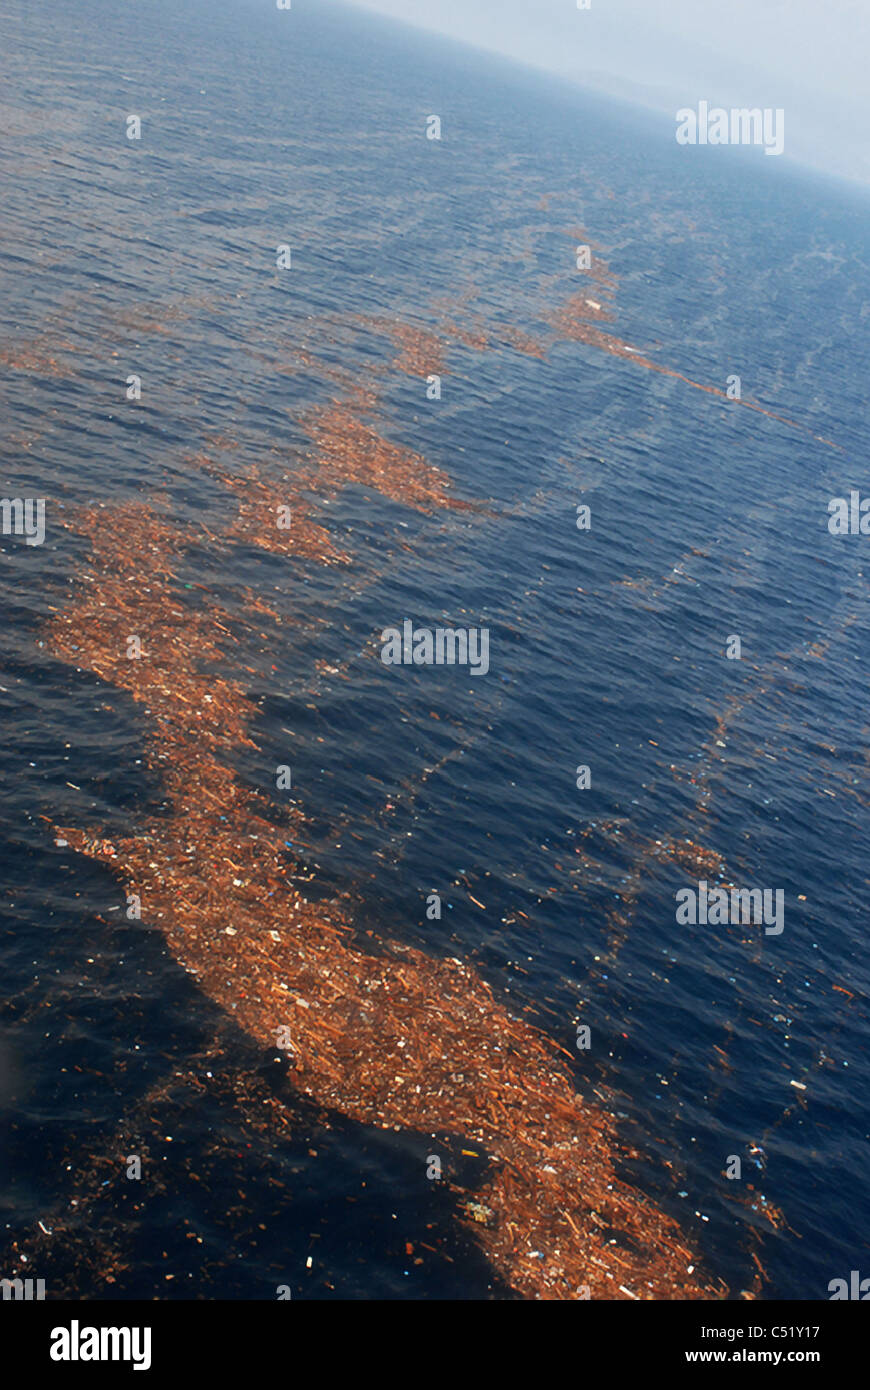 Aerial view of debris fields in the Pacific following the massive earthquake and tsunami in Japan. Stock Photo